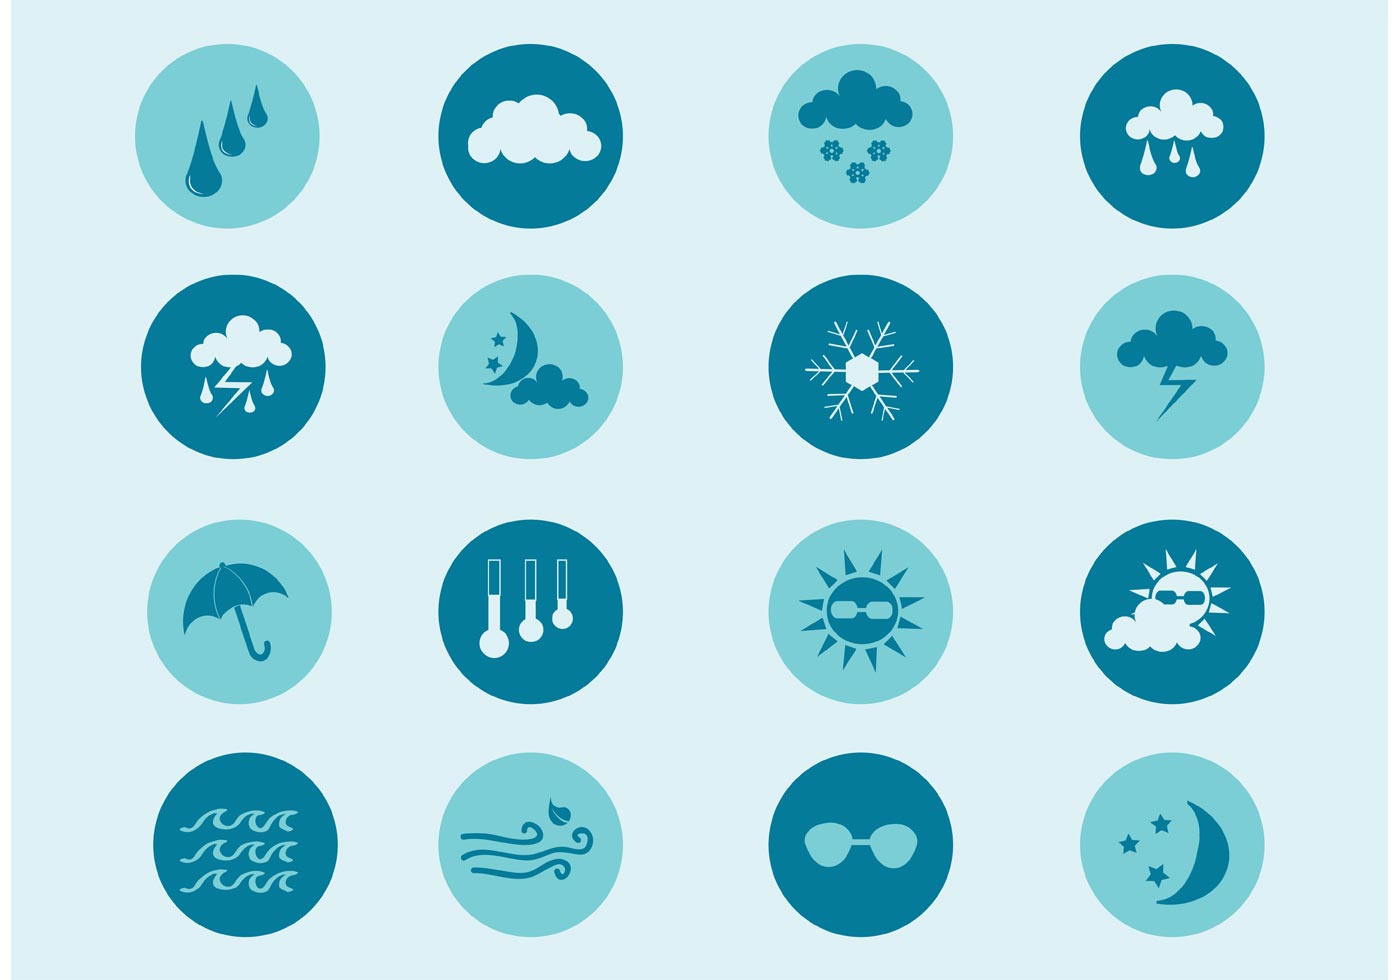 free clipart icons download - photo #35